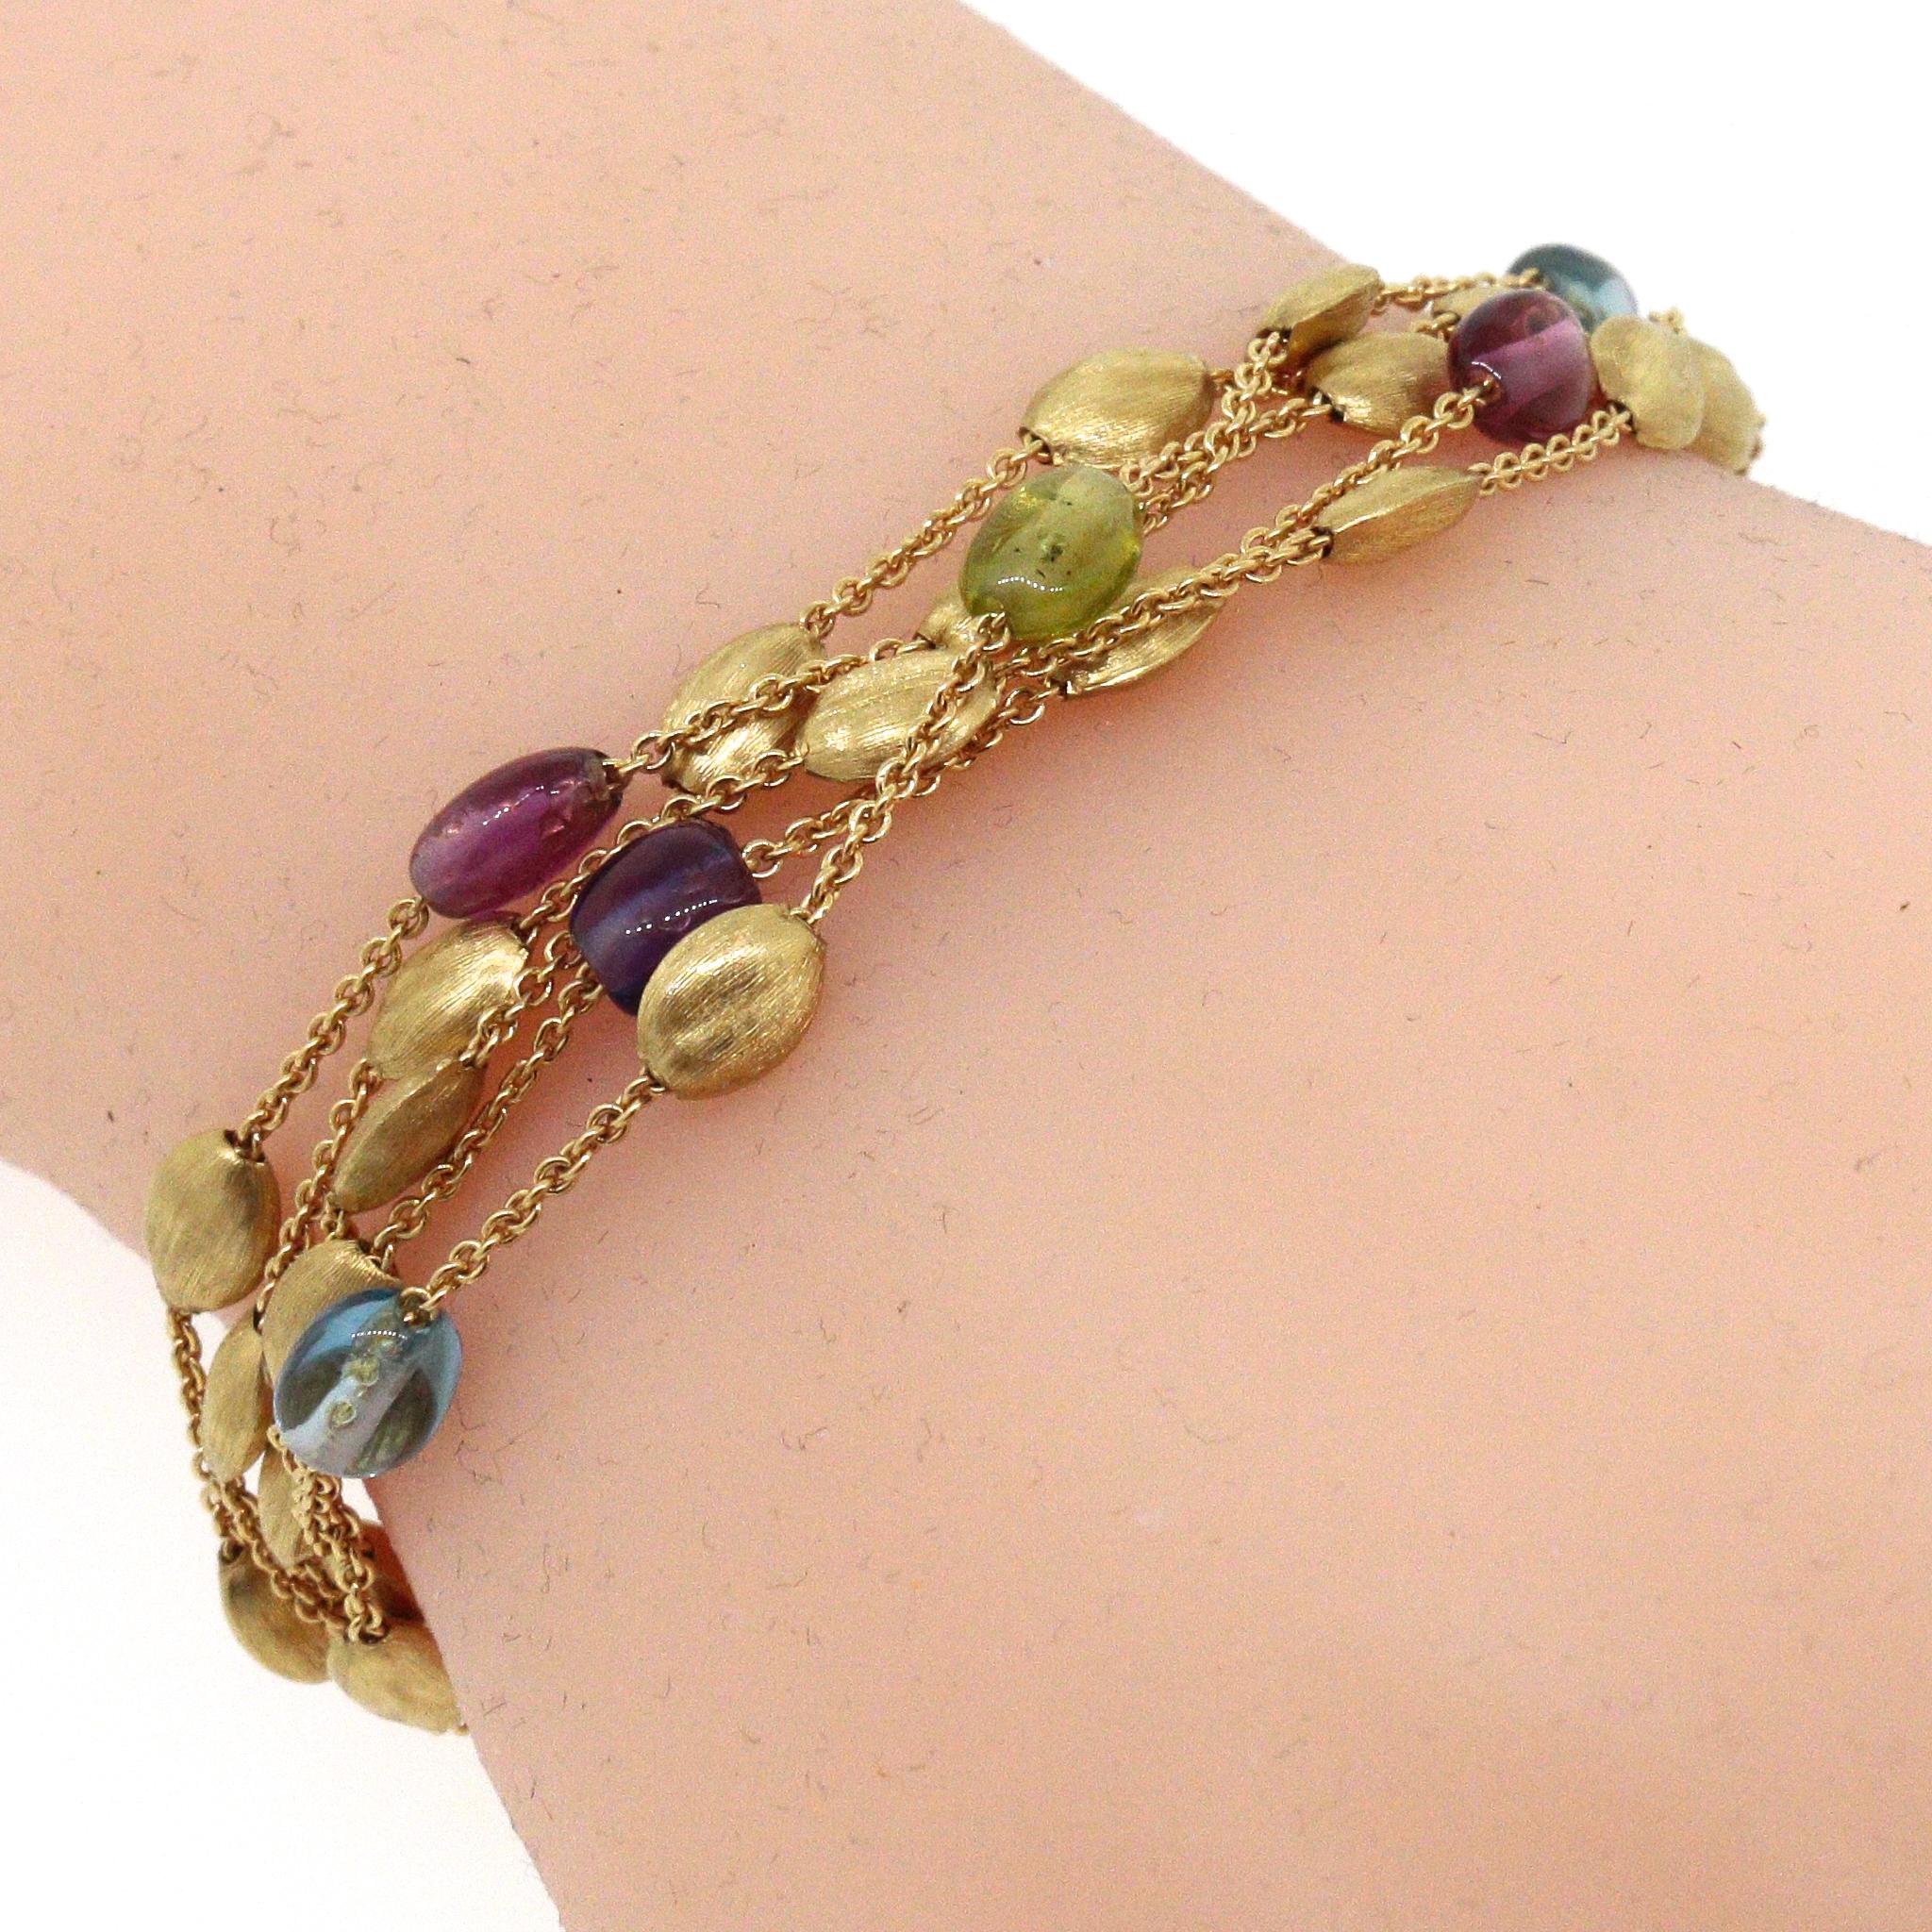 18 kt Yellow Gold - Brushed
Length: 7 inches
Semi-Precious Stones: Amethyst, London Blue Topaz, Peridot, Tourmaline
Total Weight: 16.58 grams﻿
Lobster Clasp Closure